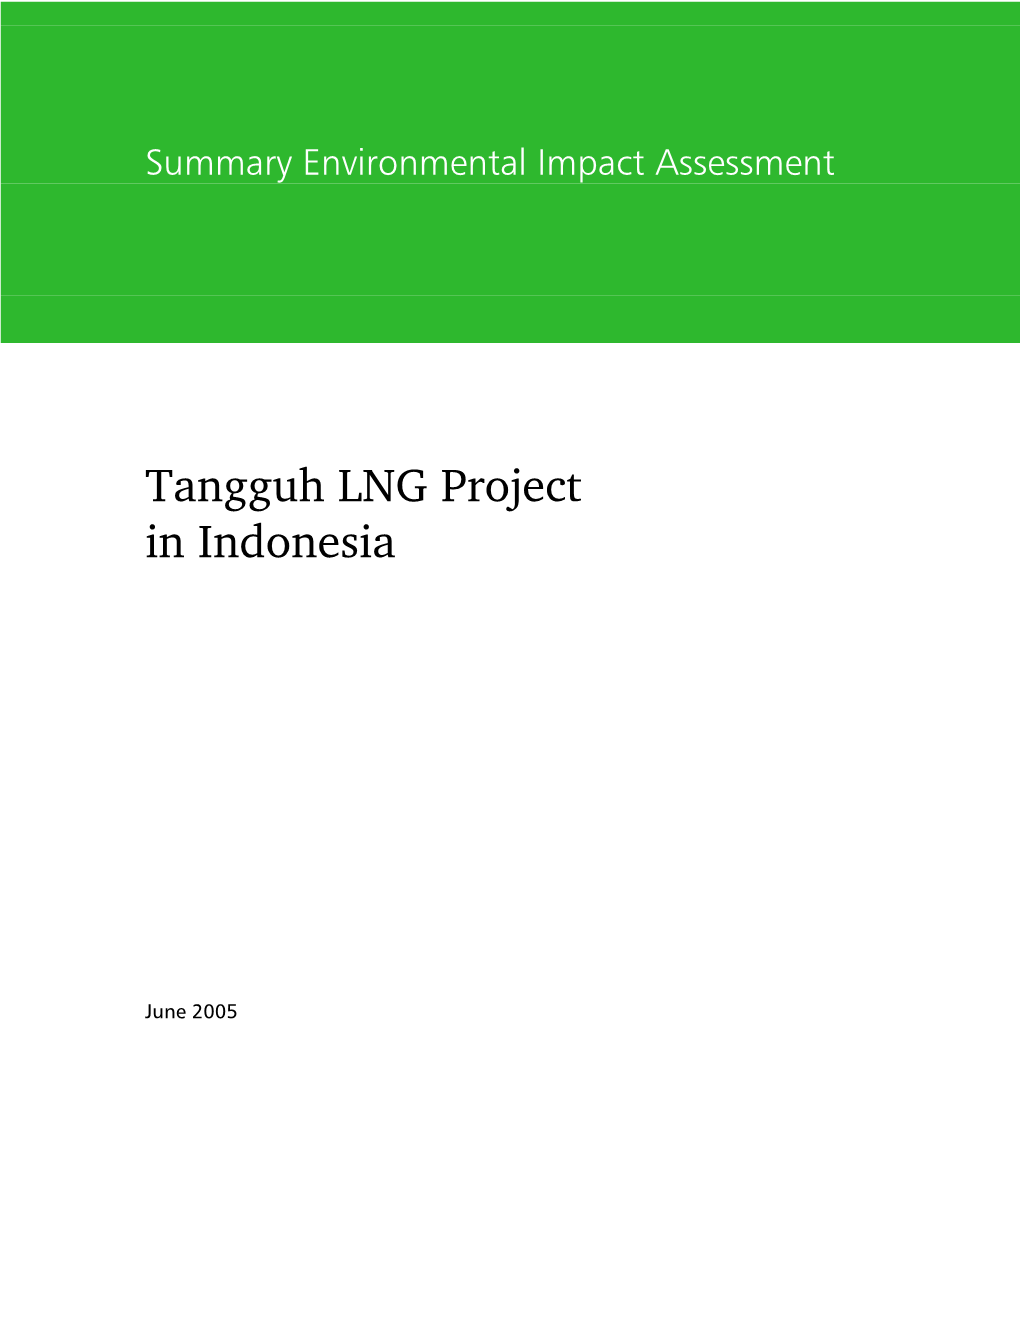 Tangguh LNG Project in Indonesia